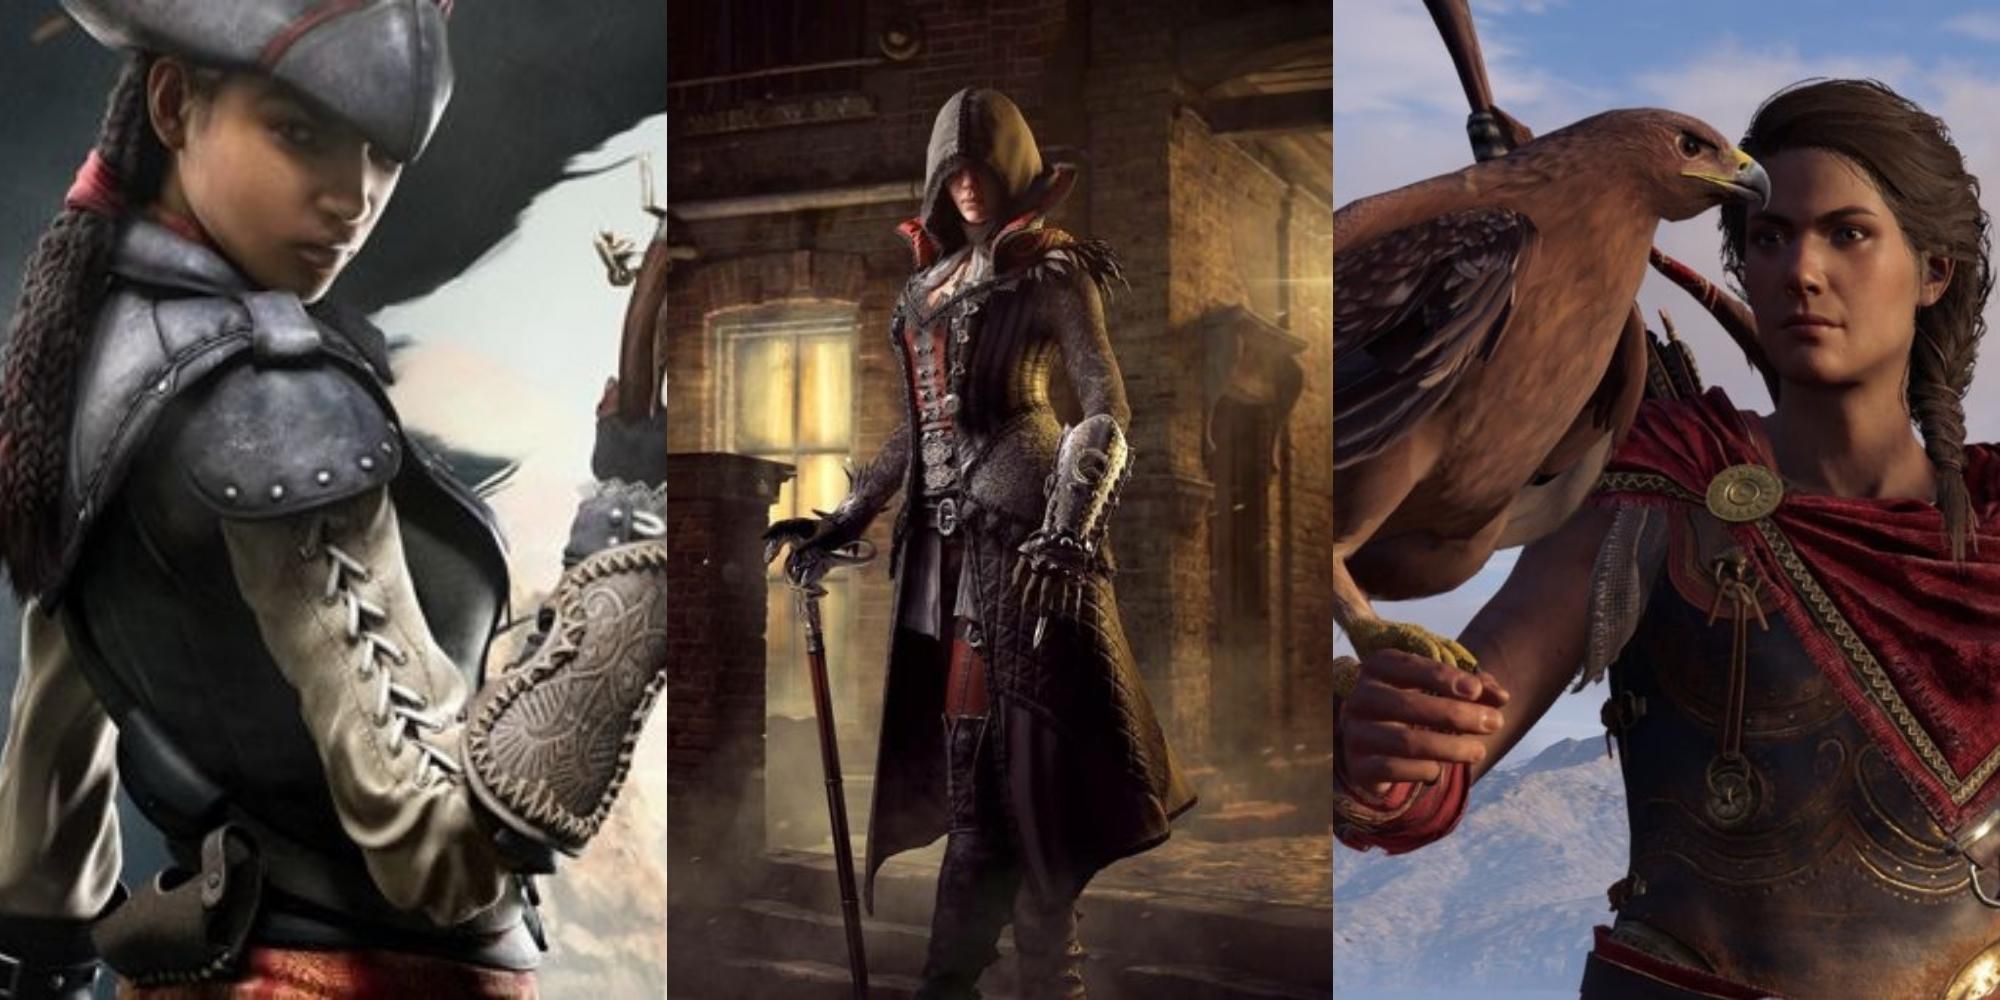 Aveline de Grandpré in Assassin's Creed III Liberation, Evie Frye in Assassin's Creed Syndicate, Kassandra in Assassin's Creed Odyssey